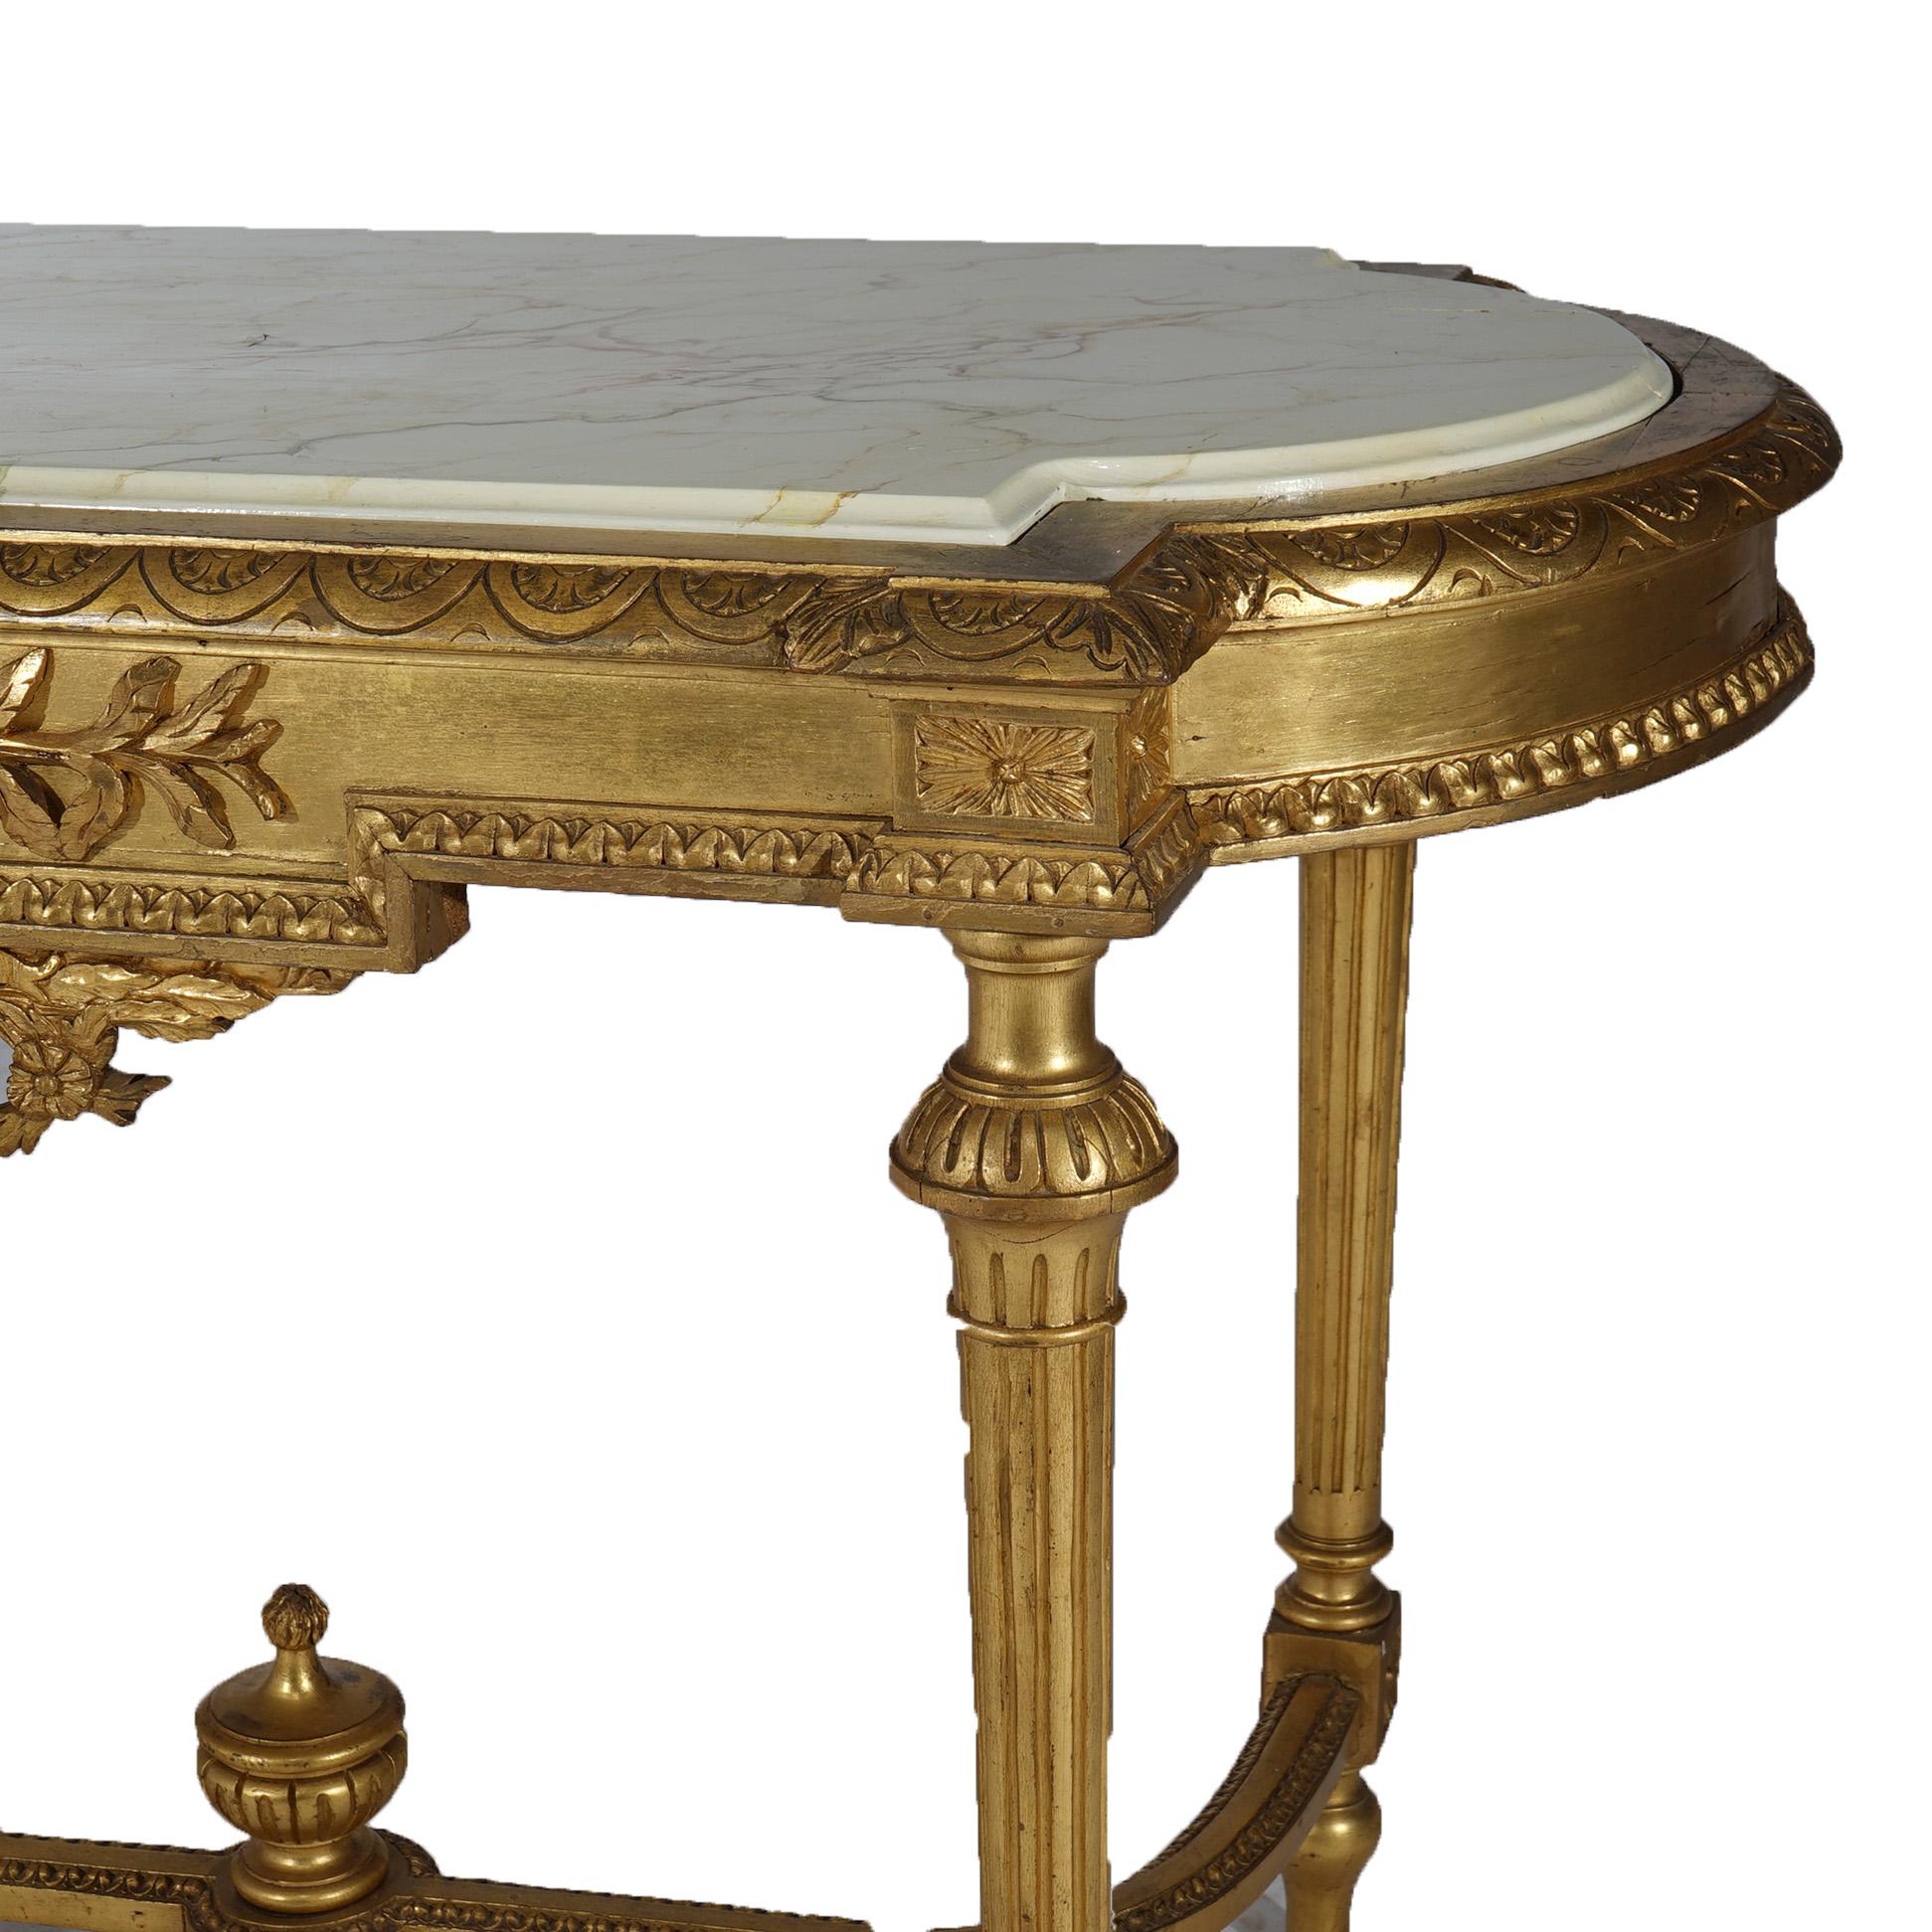 Antique French Louis XVI Style Giltwood Parlor Table with Faux Painted Top 19thC For Sale 16